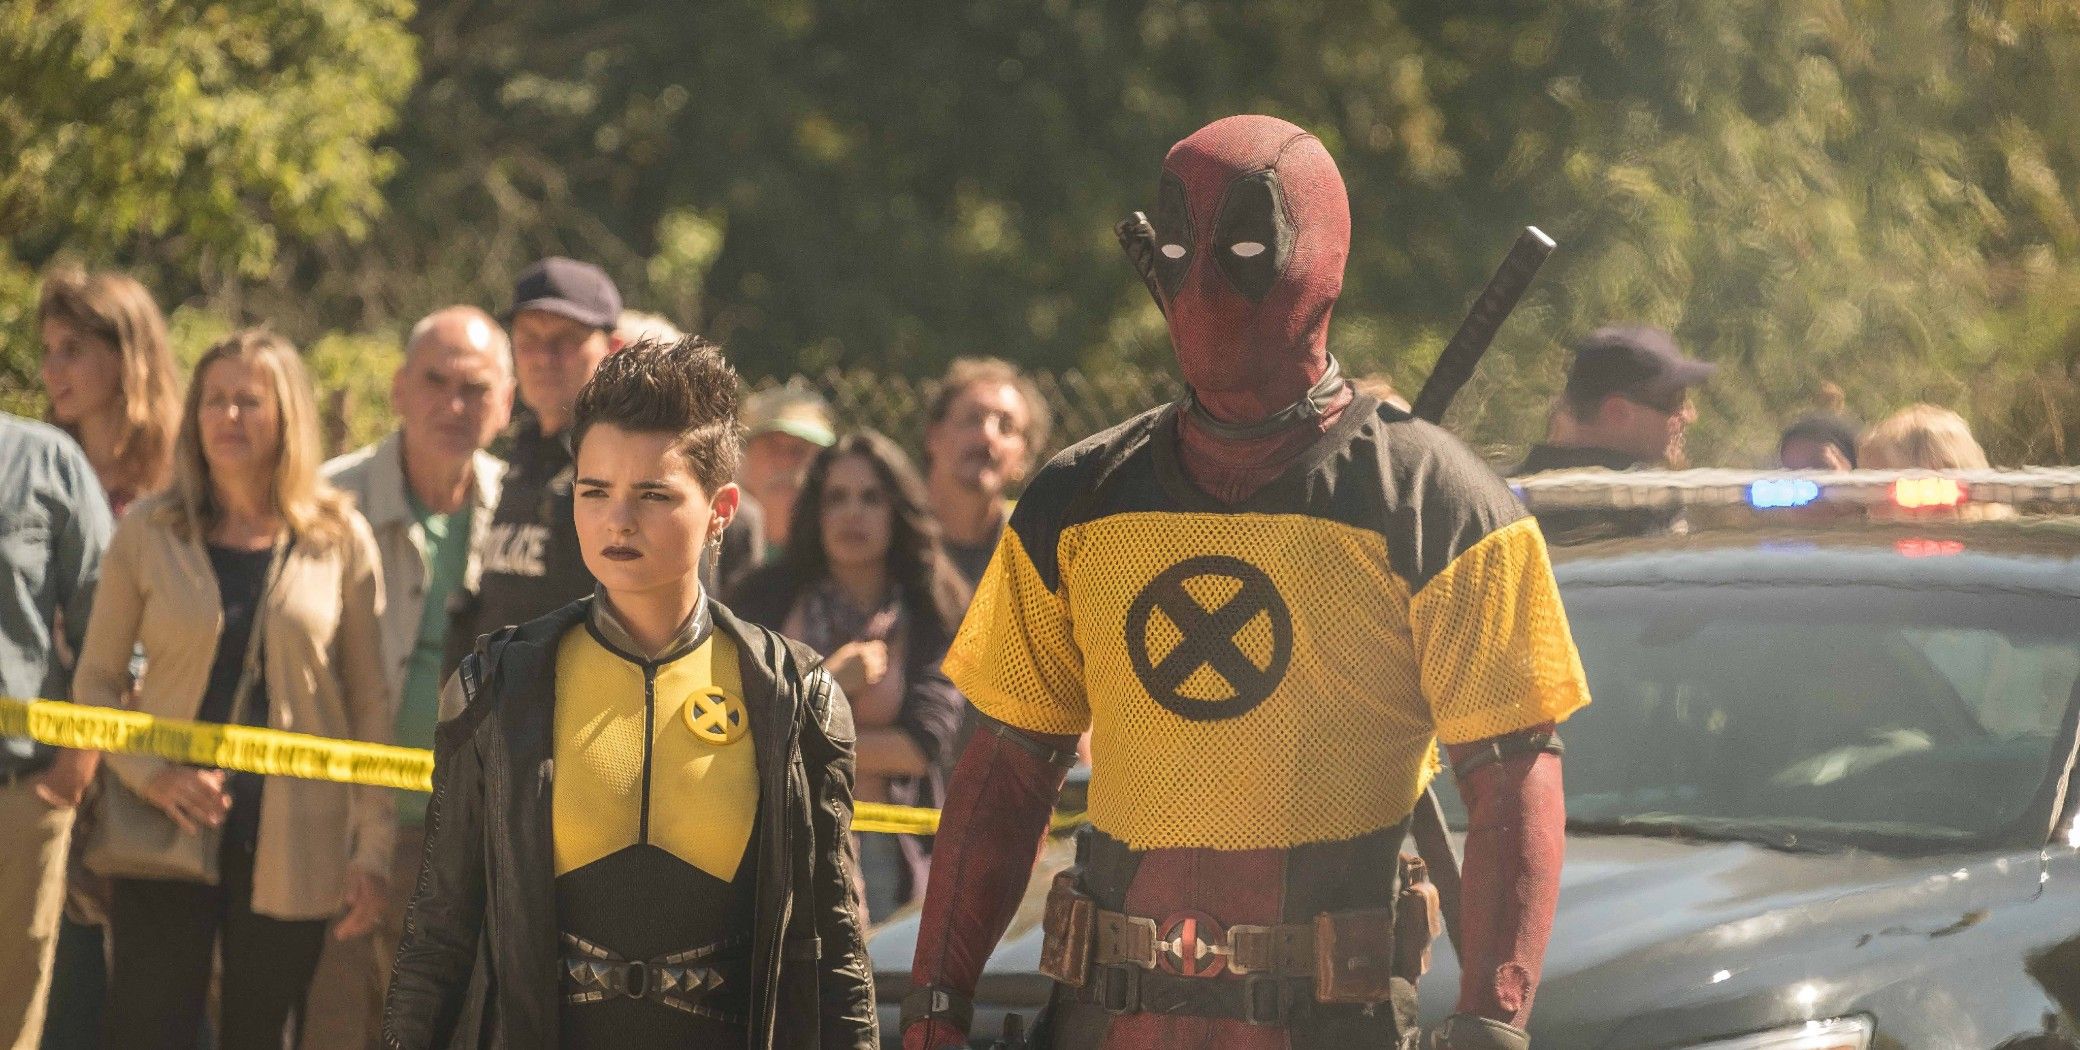 Deadpool 3: Release date, cast, trailers, & everything we know